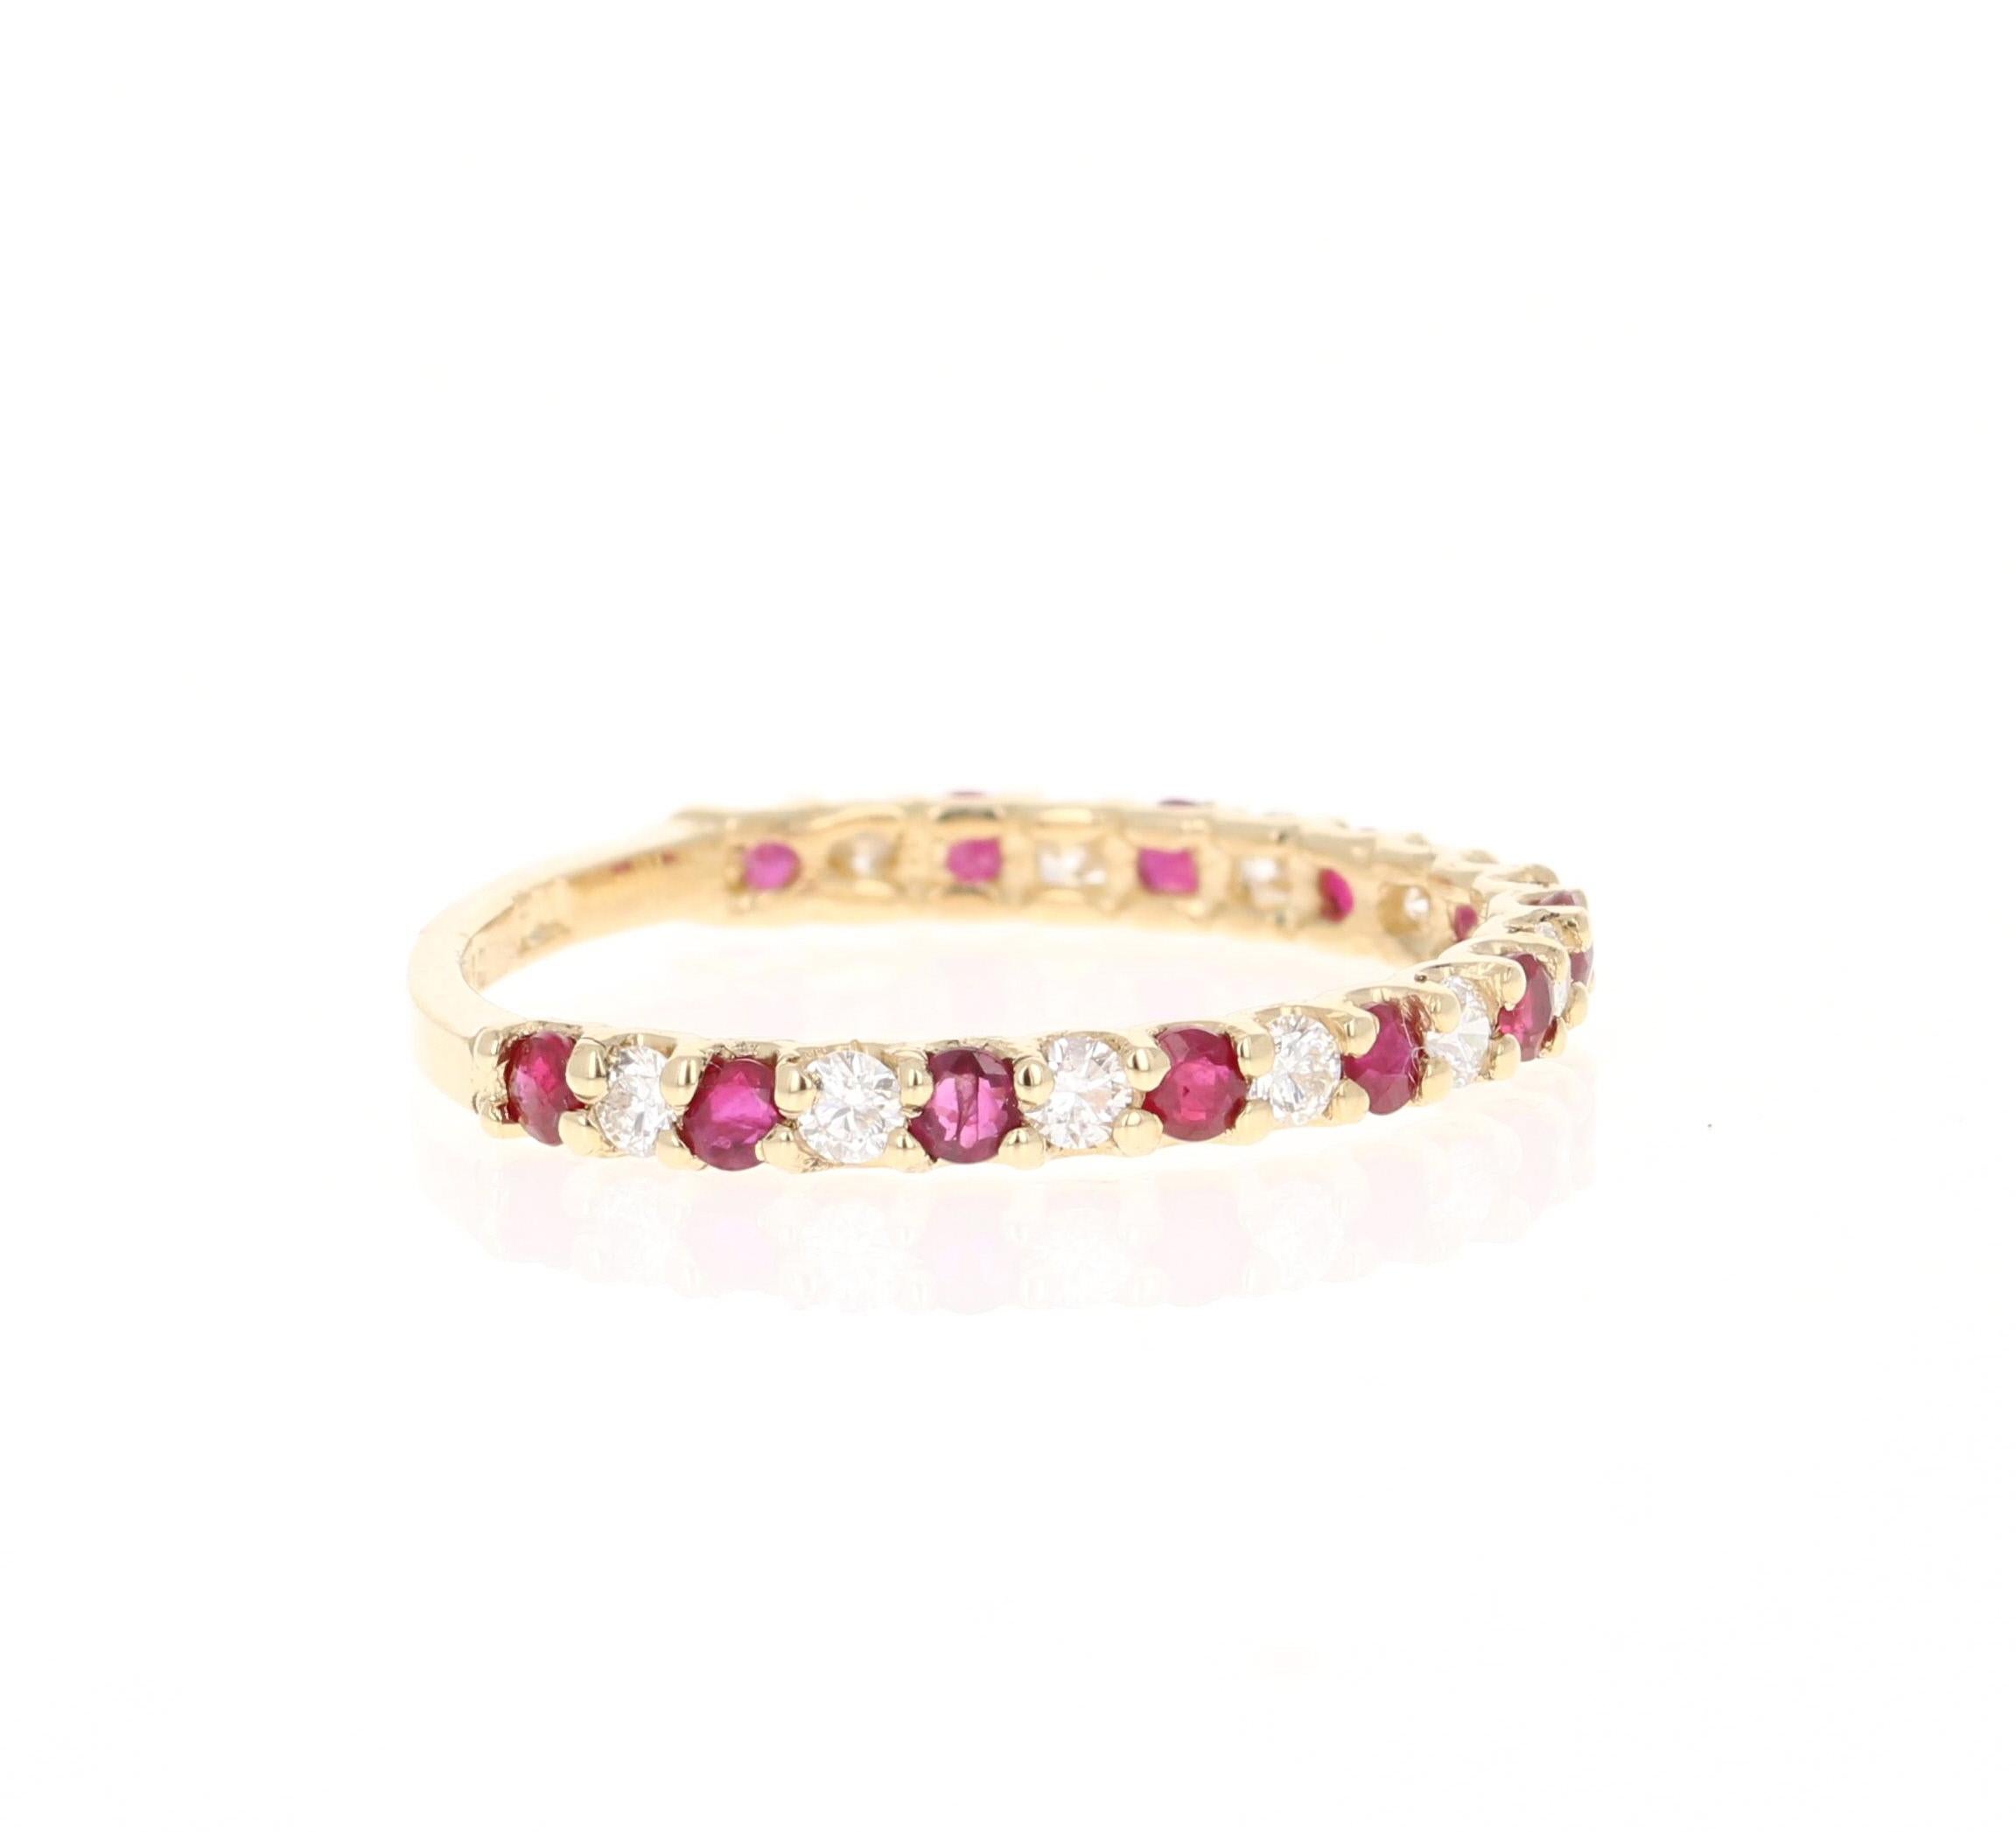 This is a classic band that is a must-have
It has 12 Rubies that weigh 0.50 Carats and 11 Round Cut Diamonds that weigh 0.28 Carats. (Clarity: SI, Color: F) The Total Carat Weight of the Band is 0.78 Carats
It is made in 14K Yellow Gold and weighs